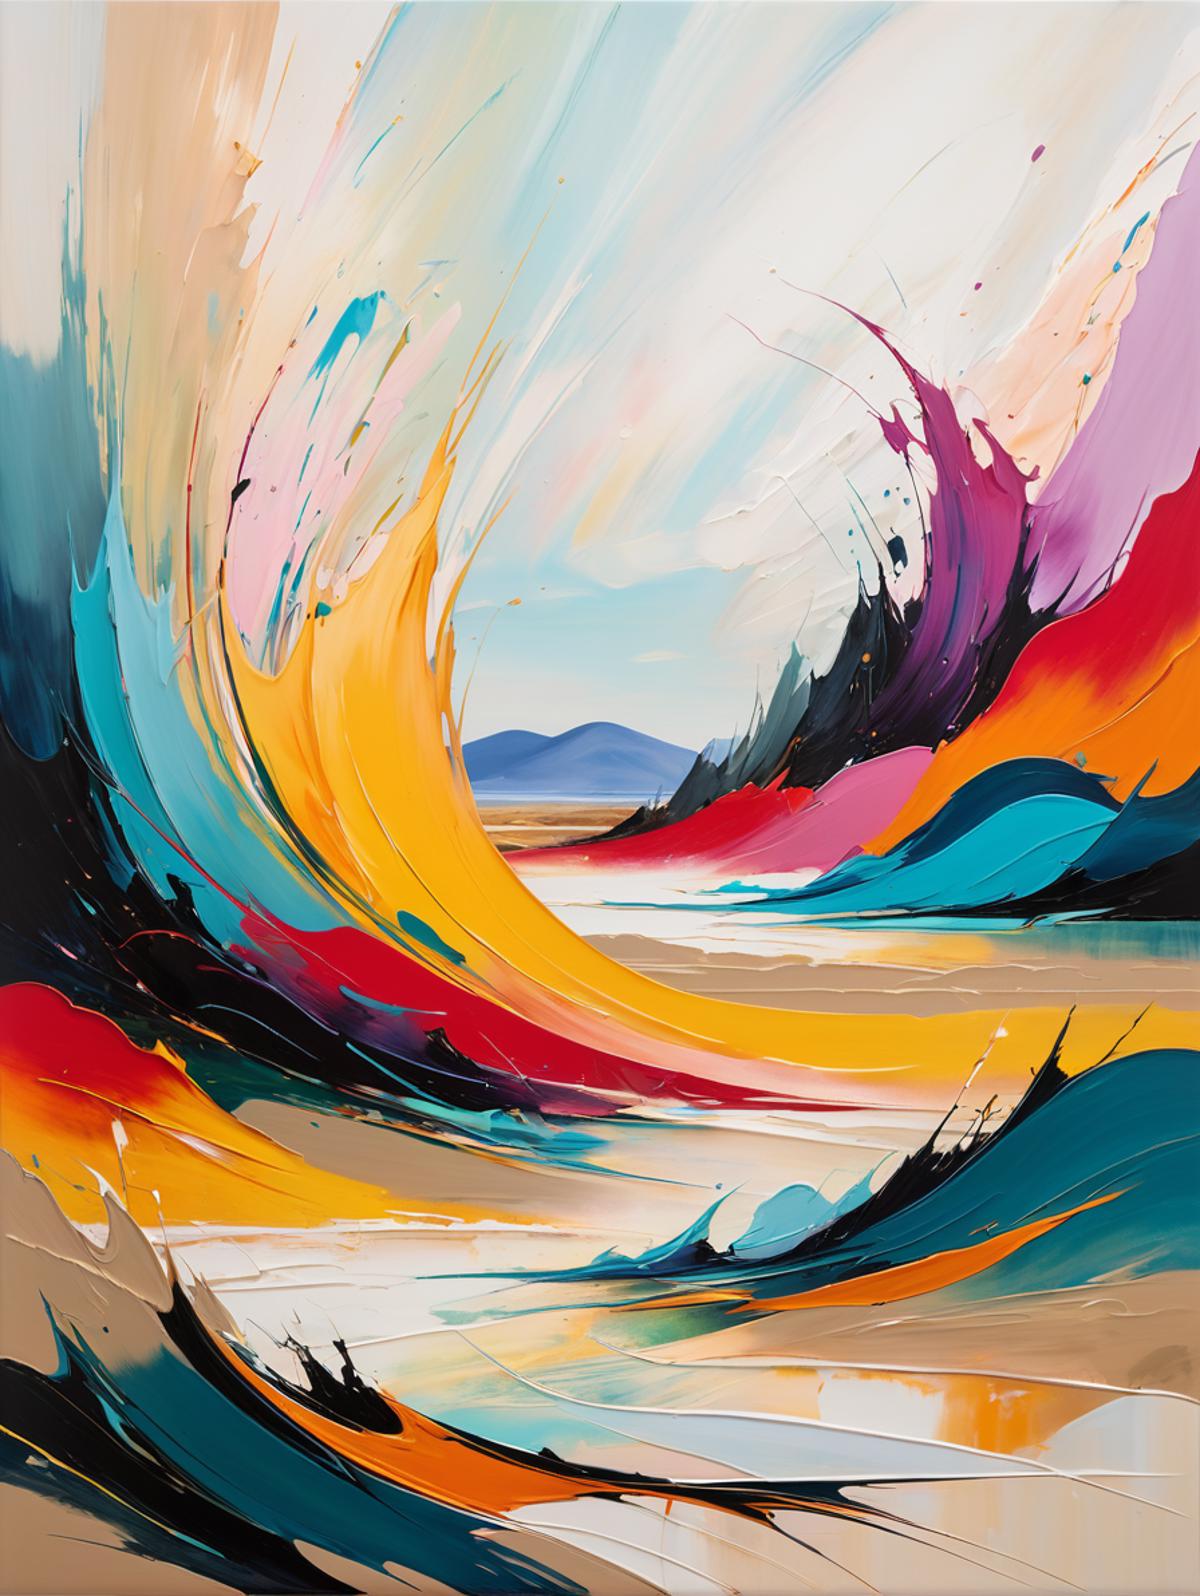 Colorful Abstract Painting of Mountains, Water, and Sky